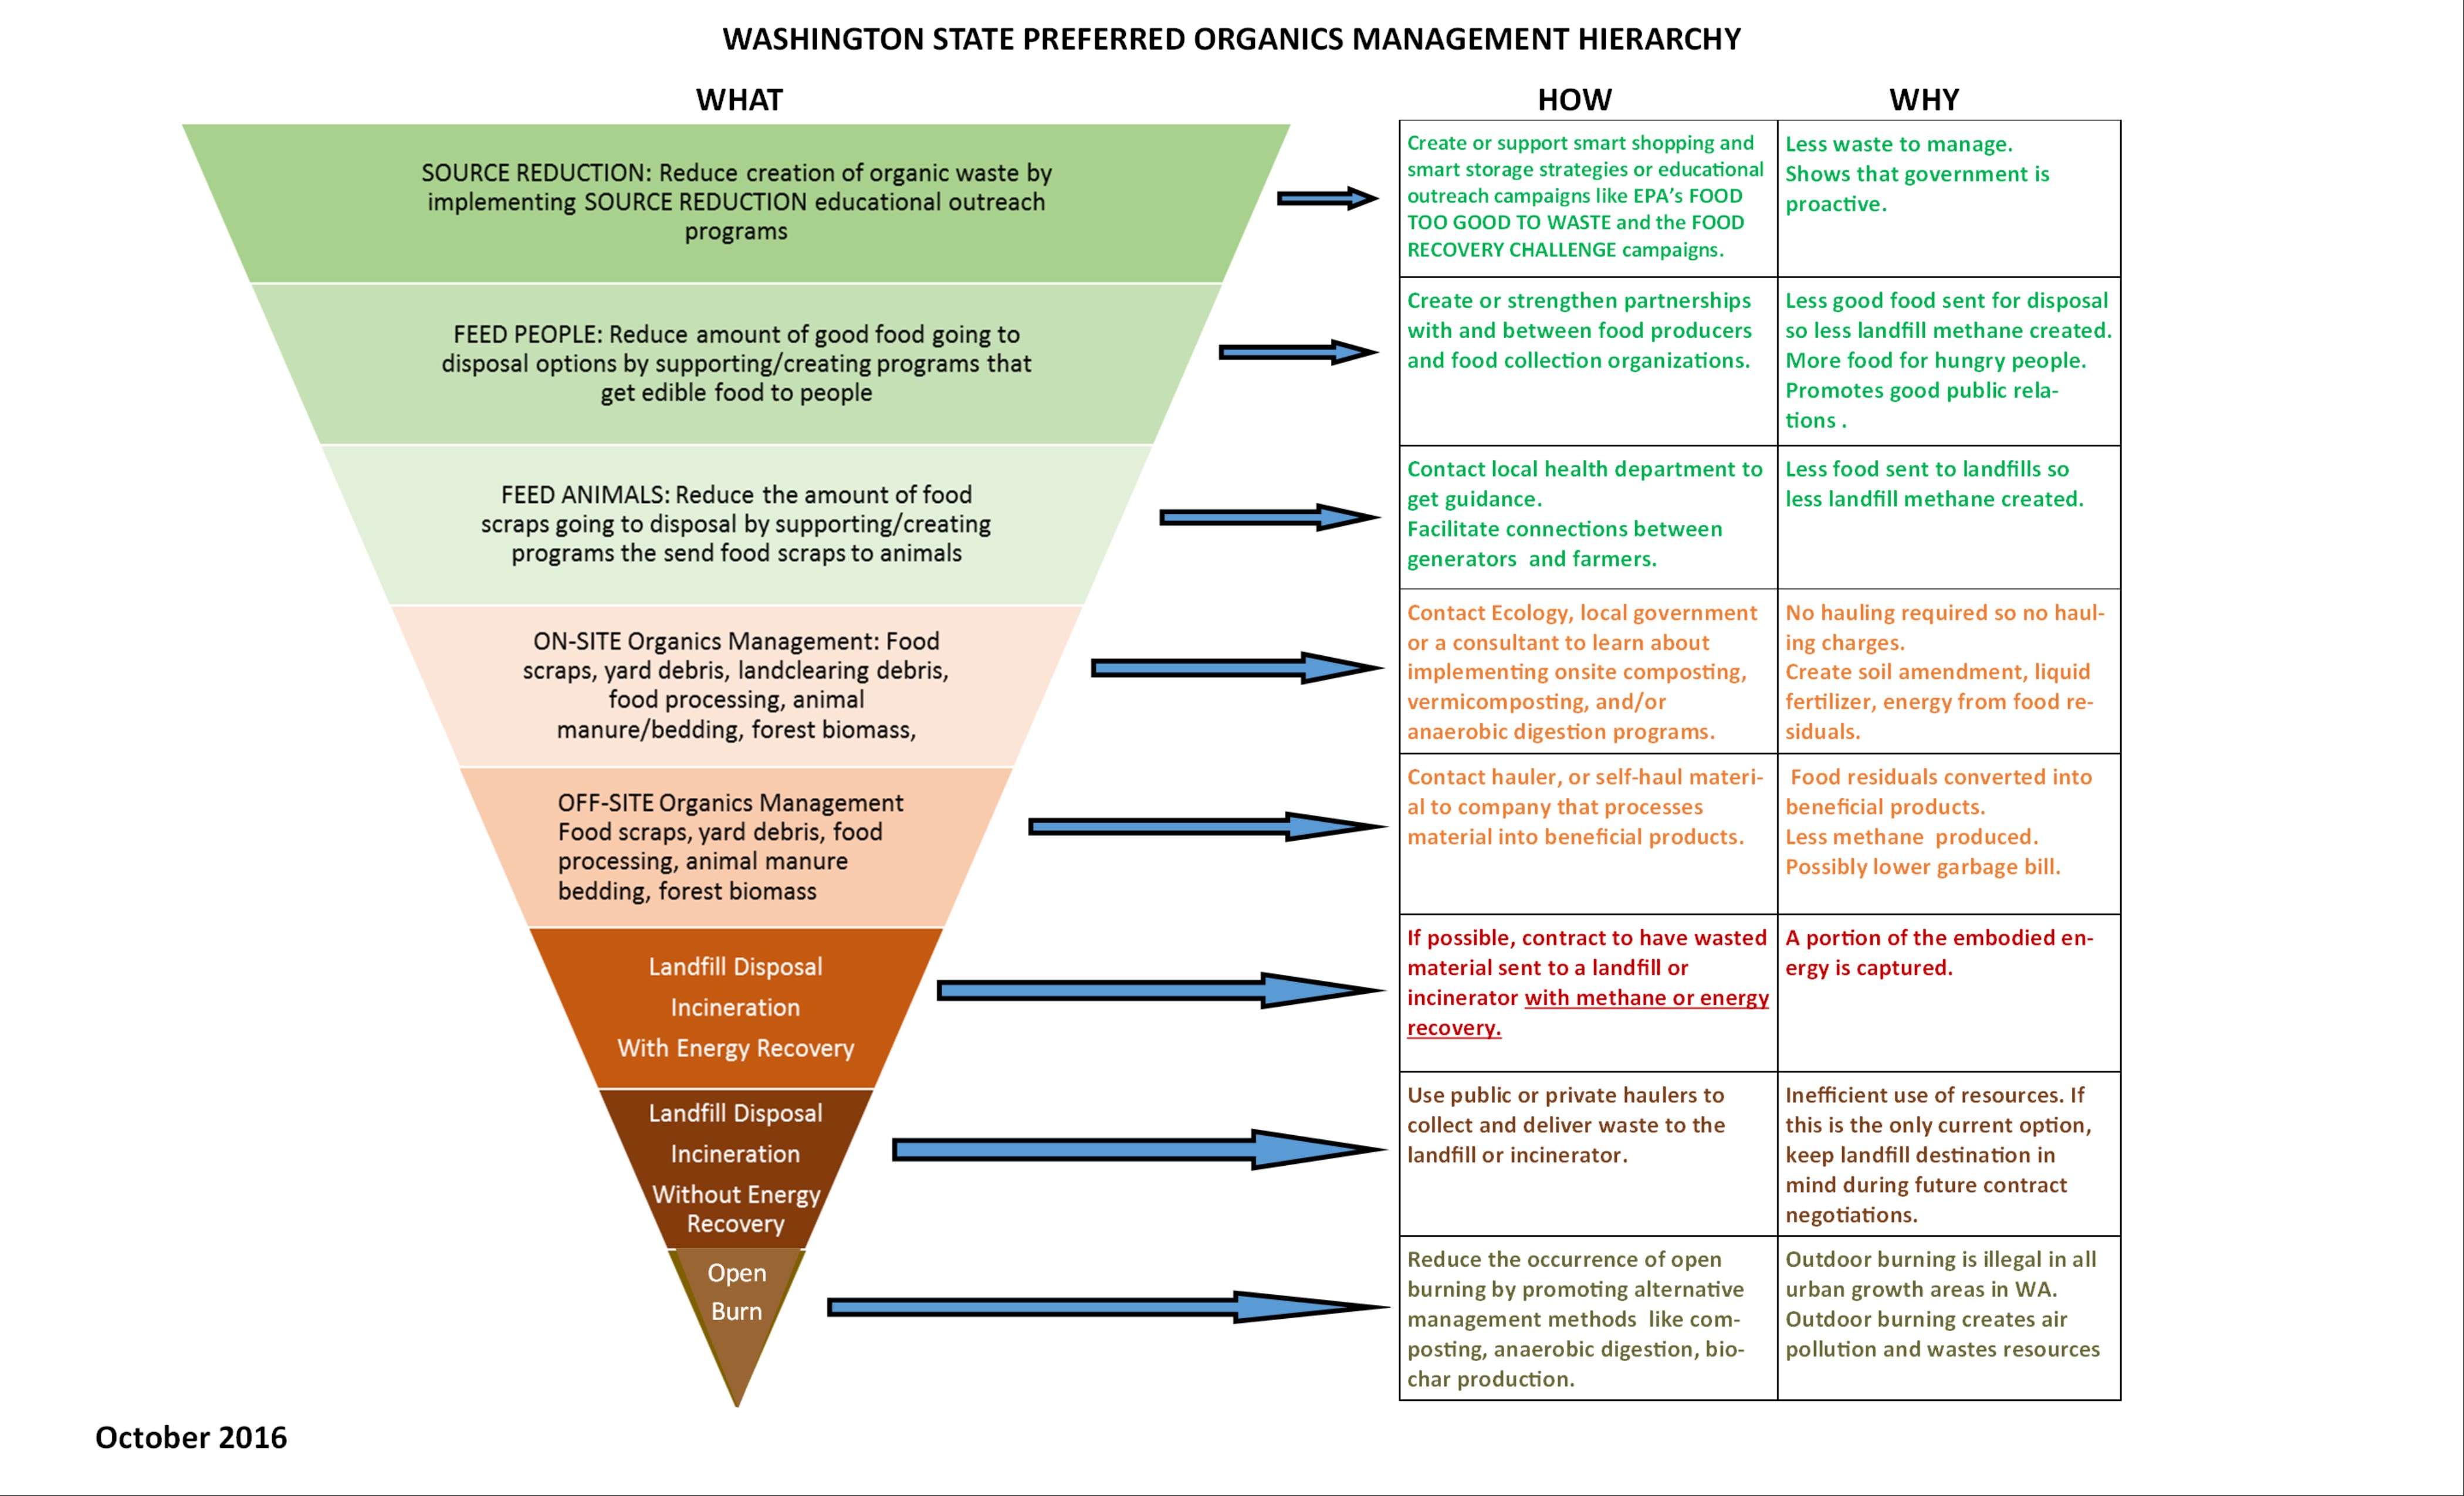 An infographic showing the preferred hierarchy of methods to reduce and reuse organic waste in Washington.